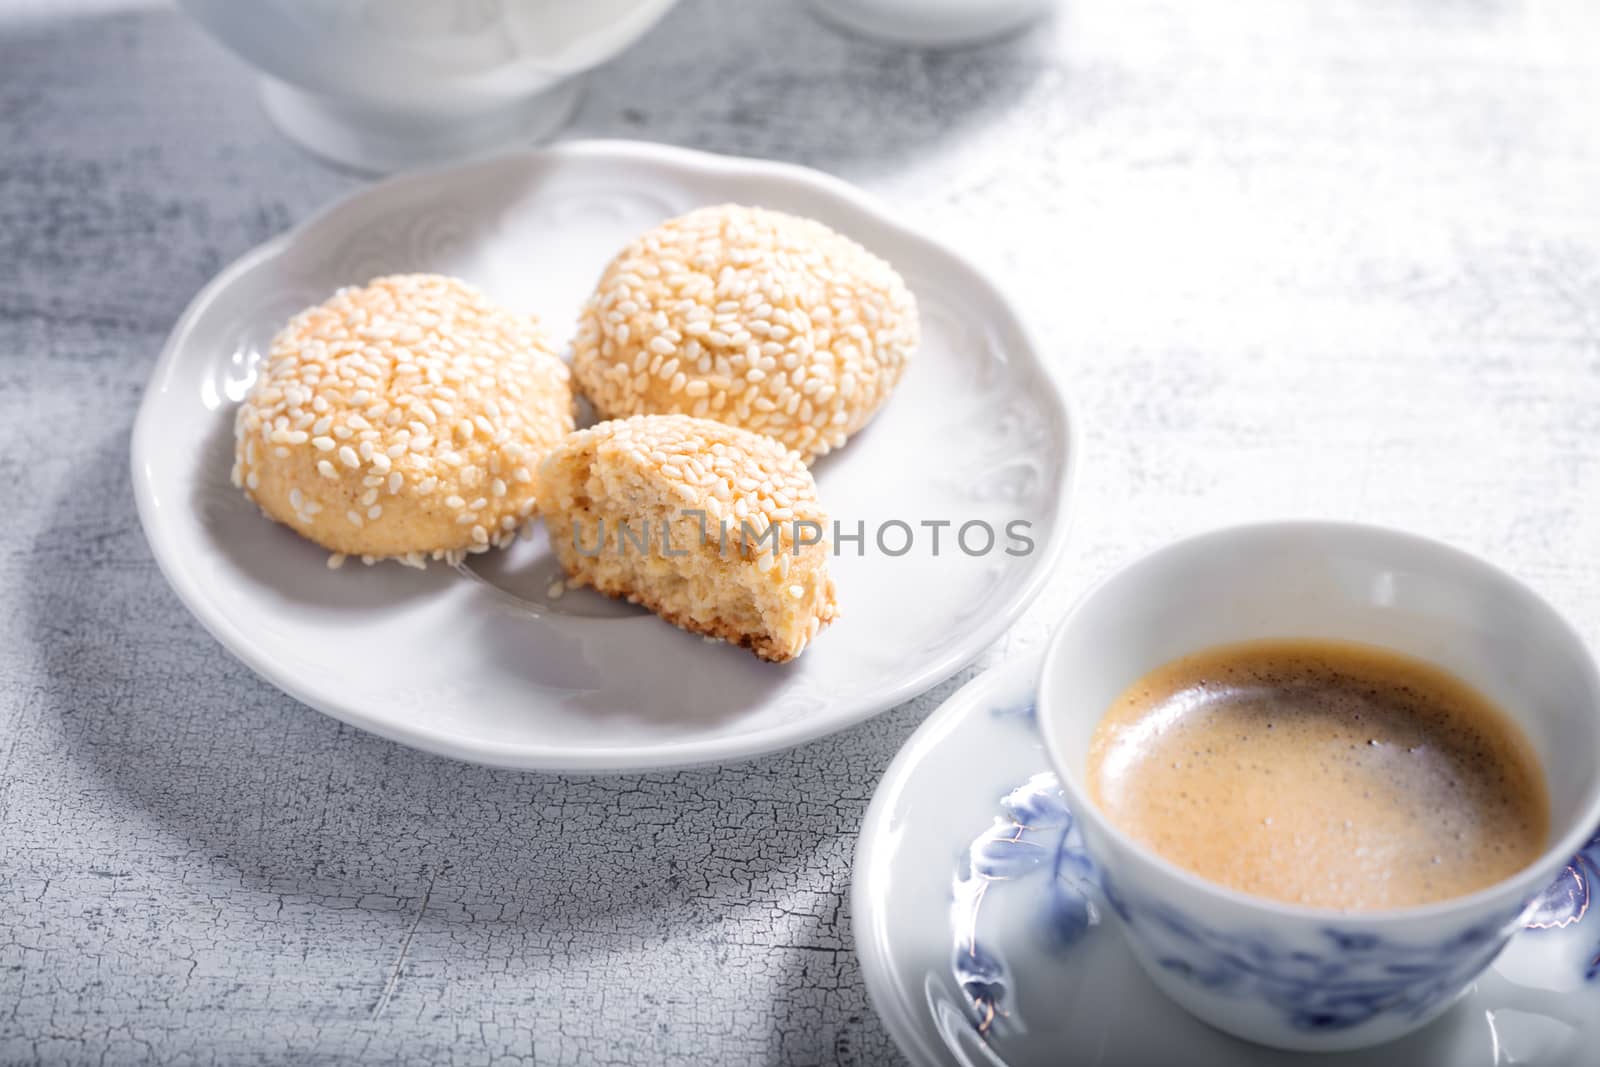 Almond cookies and coffee by supercat67